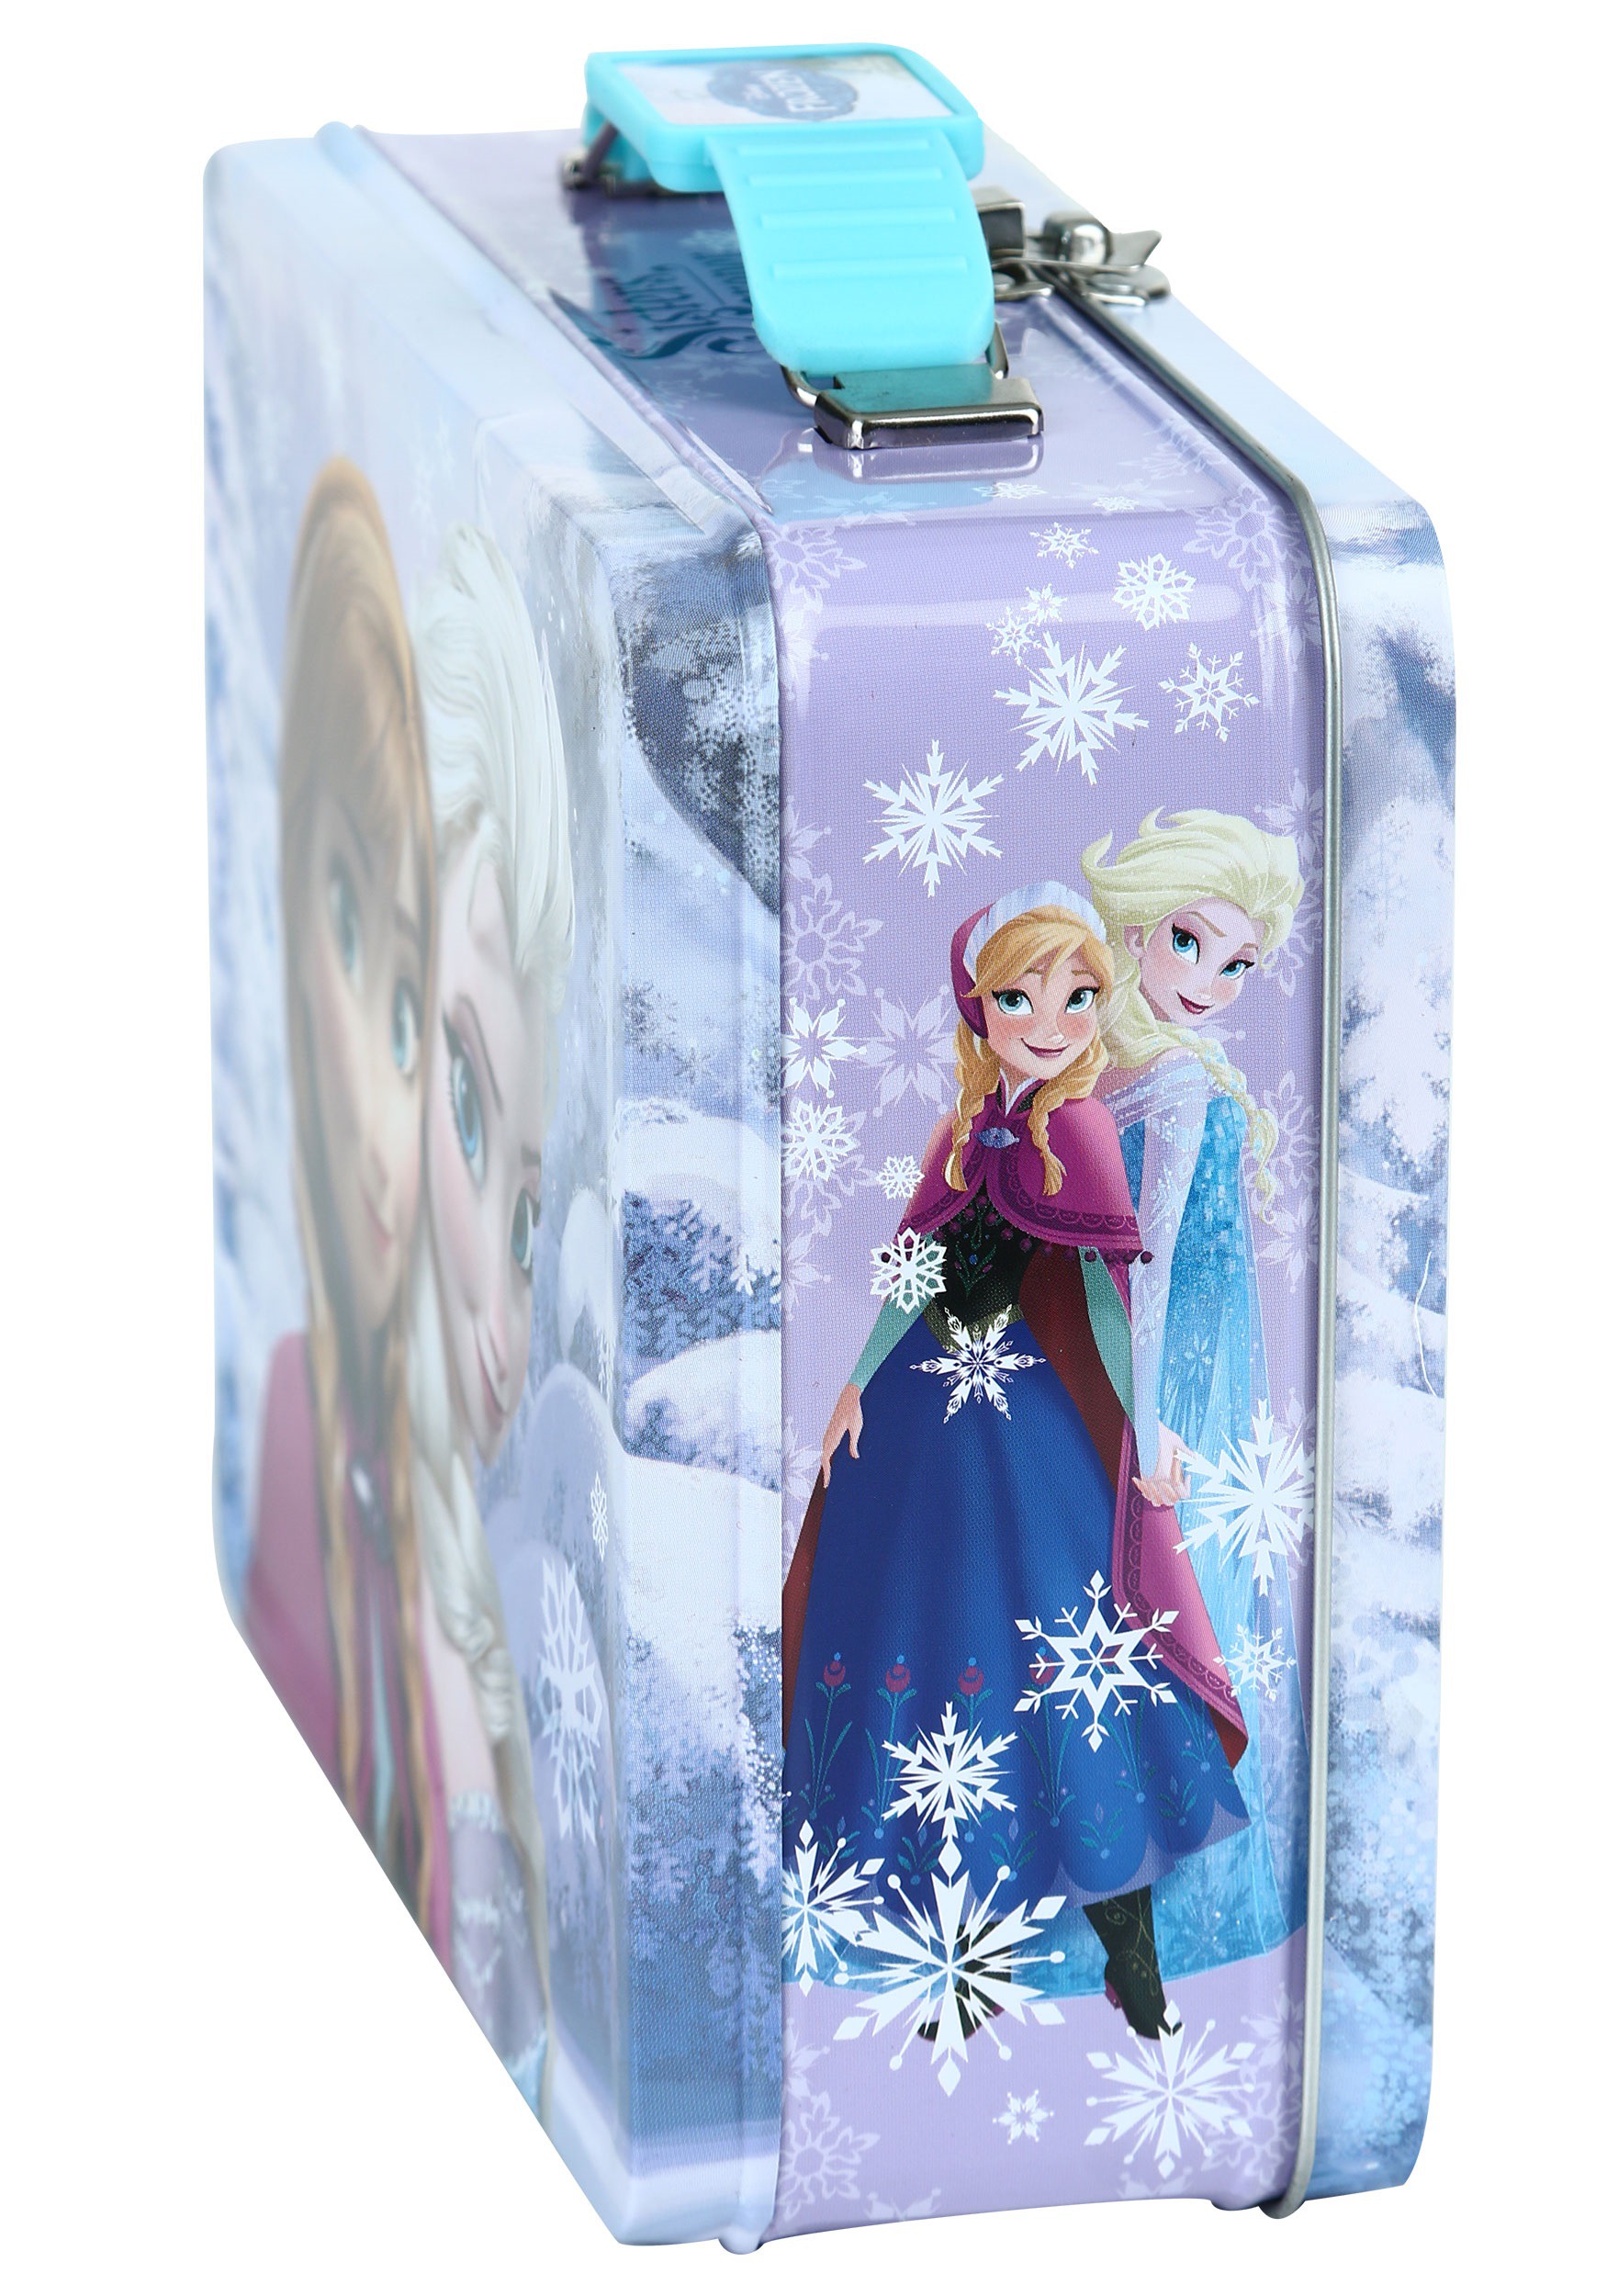 https://images.fun.com/products/30087/2-1-64326/frozen-embossed-anna-elsa-lunch-box2.jpg